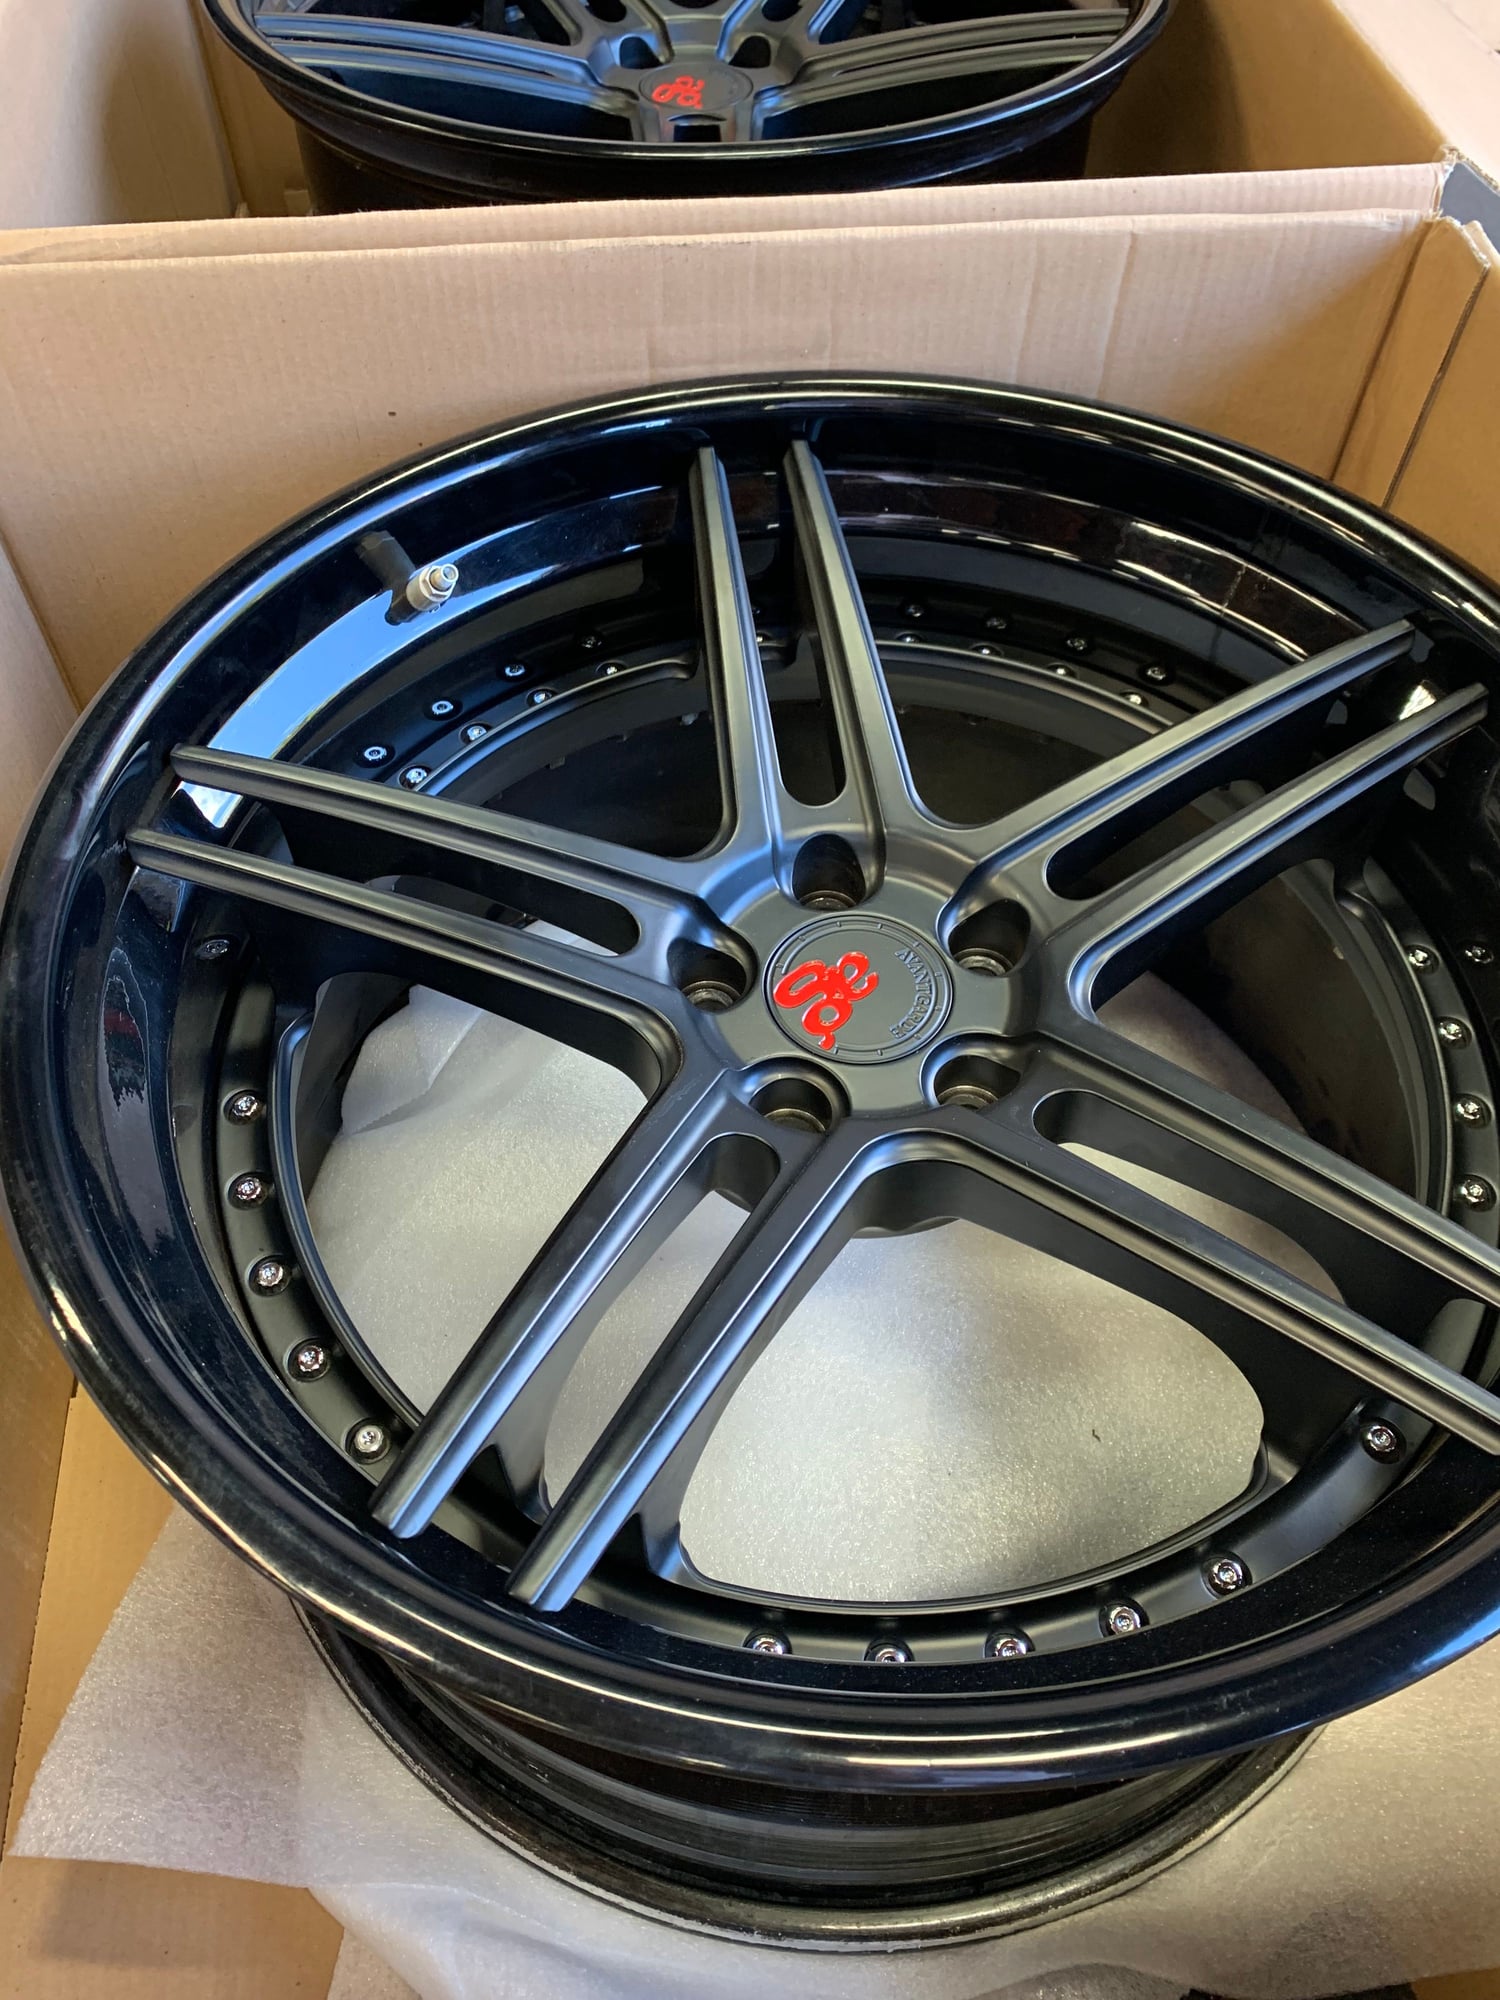 Wheels and Tires/Axles - Custom AG 3 piece wheels 20 inch - Used - 2013 to 2018 Mercedes-Benz SL550 - Pleasanton, CA 94568, United States